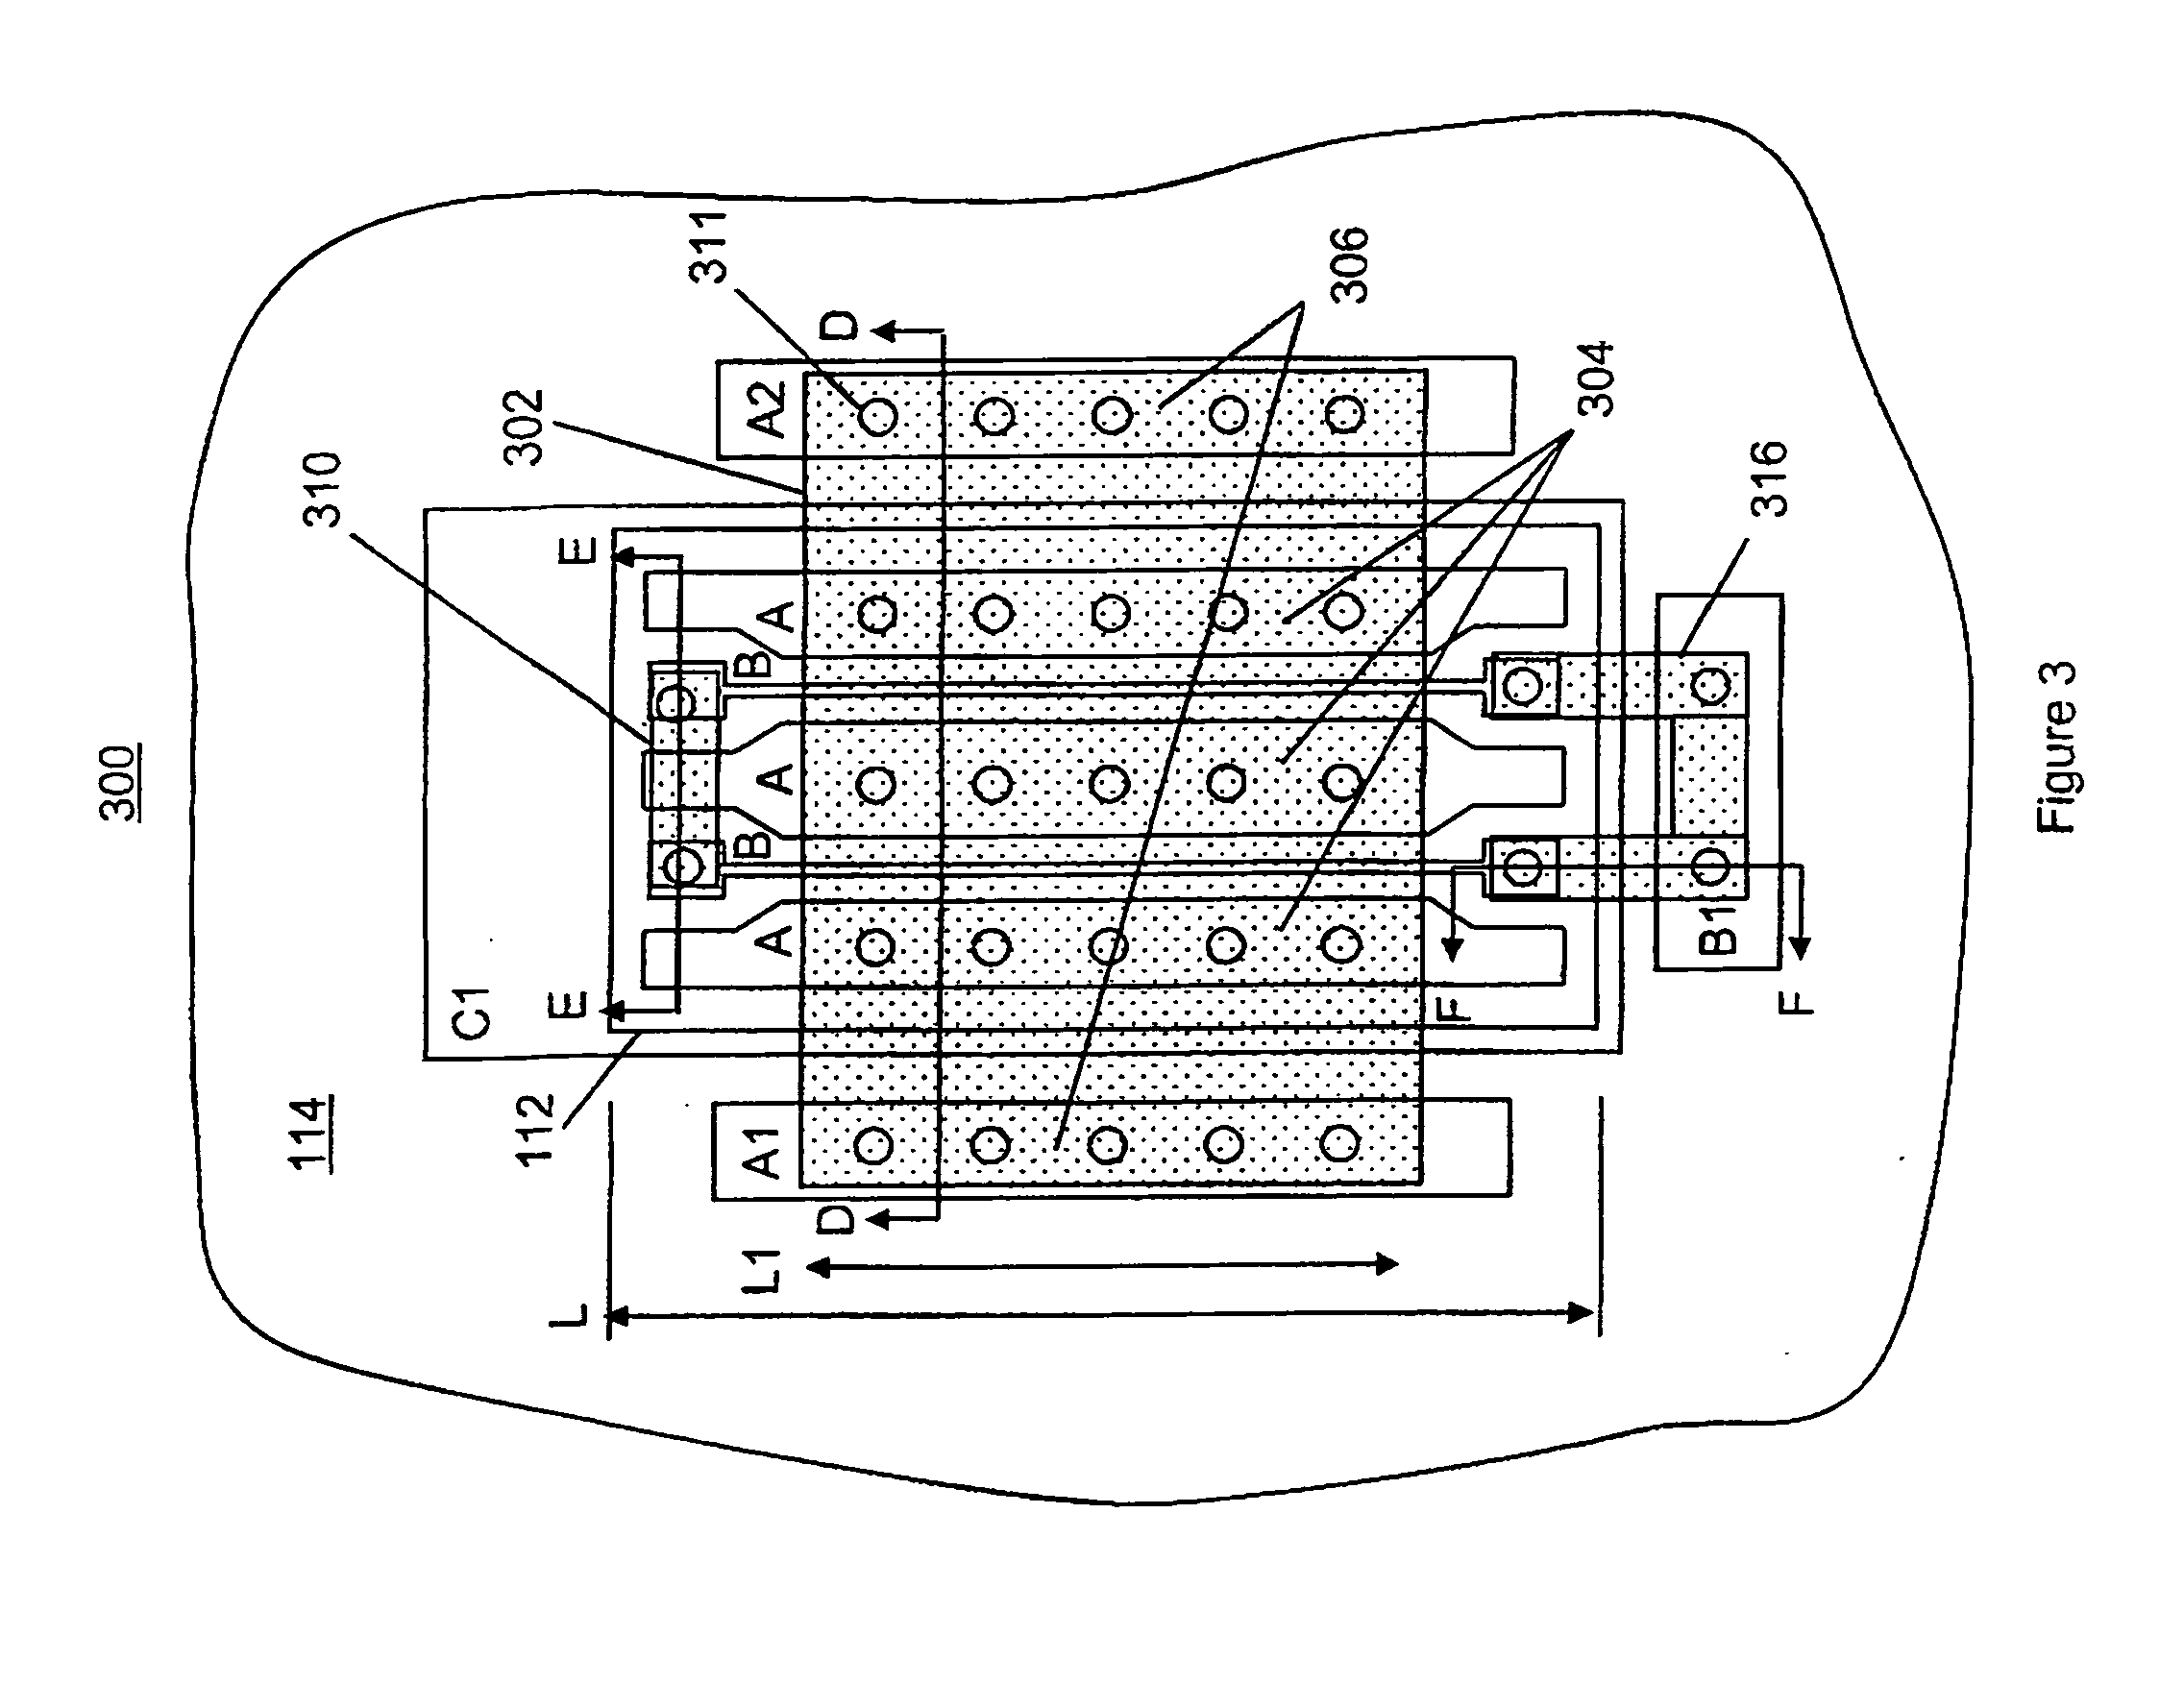 Metal foil interconnection of electrical devices